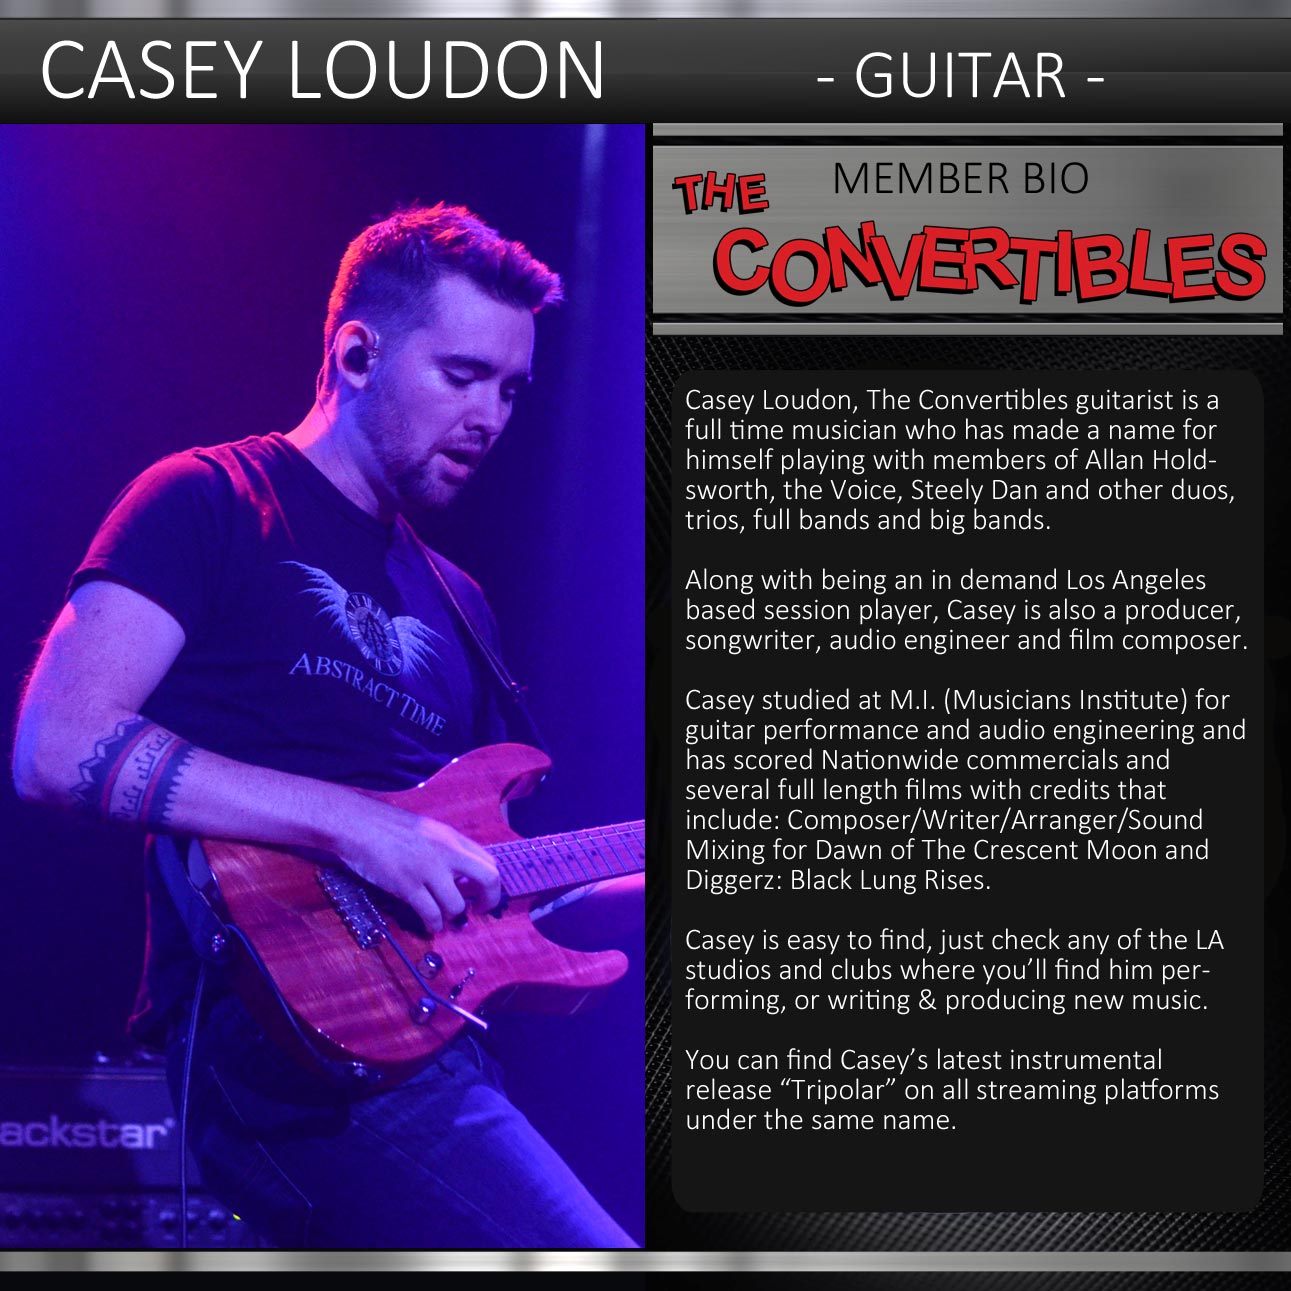 Casey Loudon’s immense contribution to The Convertibles is in how expresses himself with a addictive melodic approach on guitar.